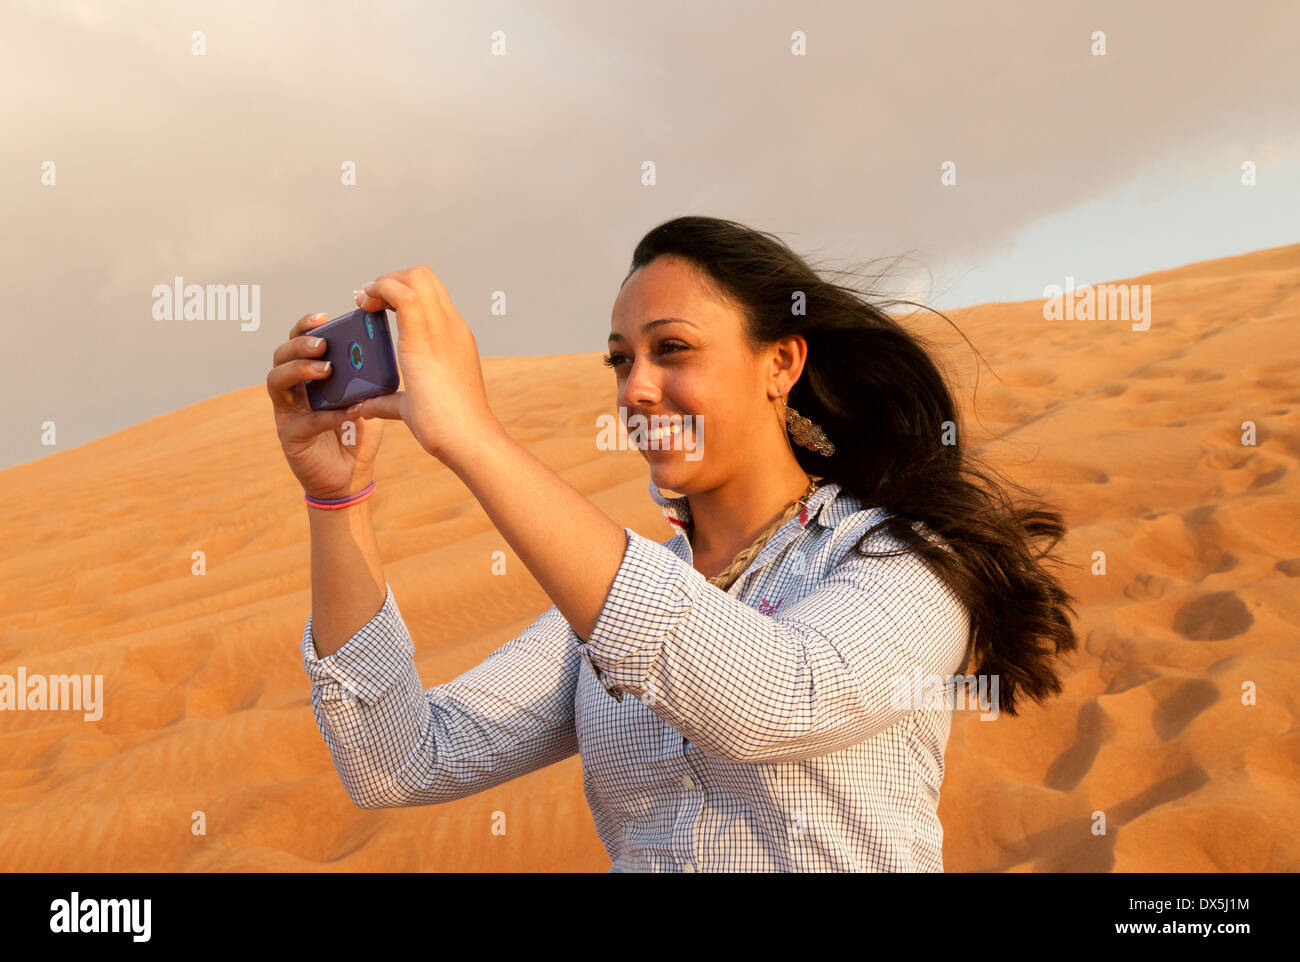 Woman taking a selfie photo in the Arabian desert, on holiday in Dubai, UAE, United Arab Emirates Middle East Stock Photo